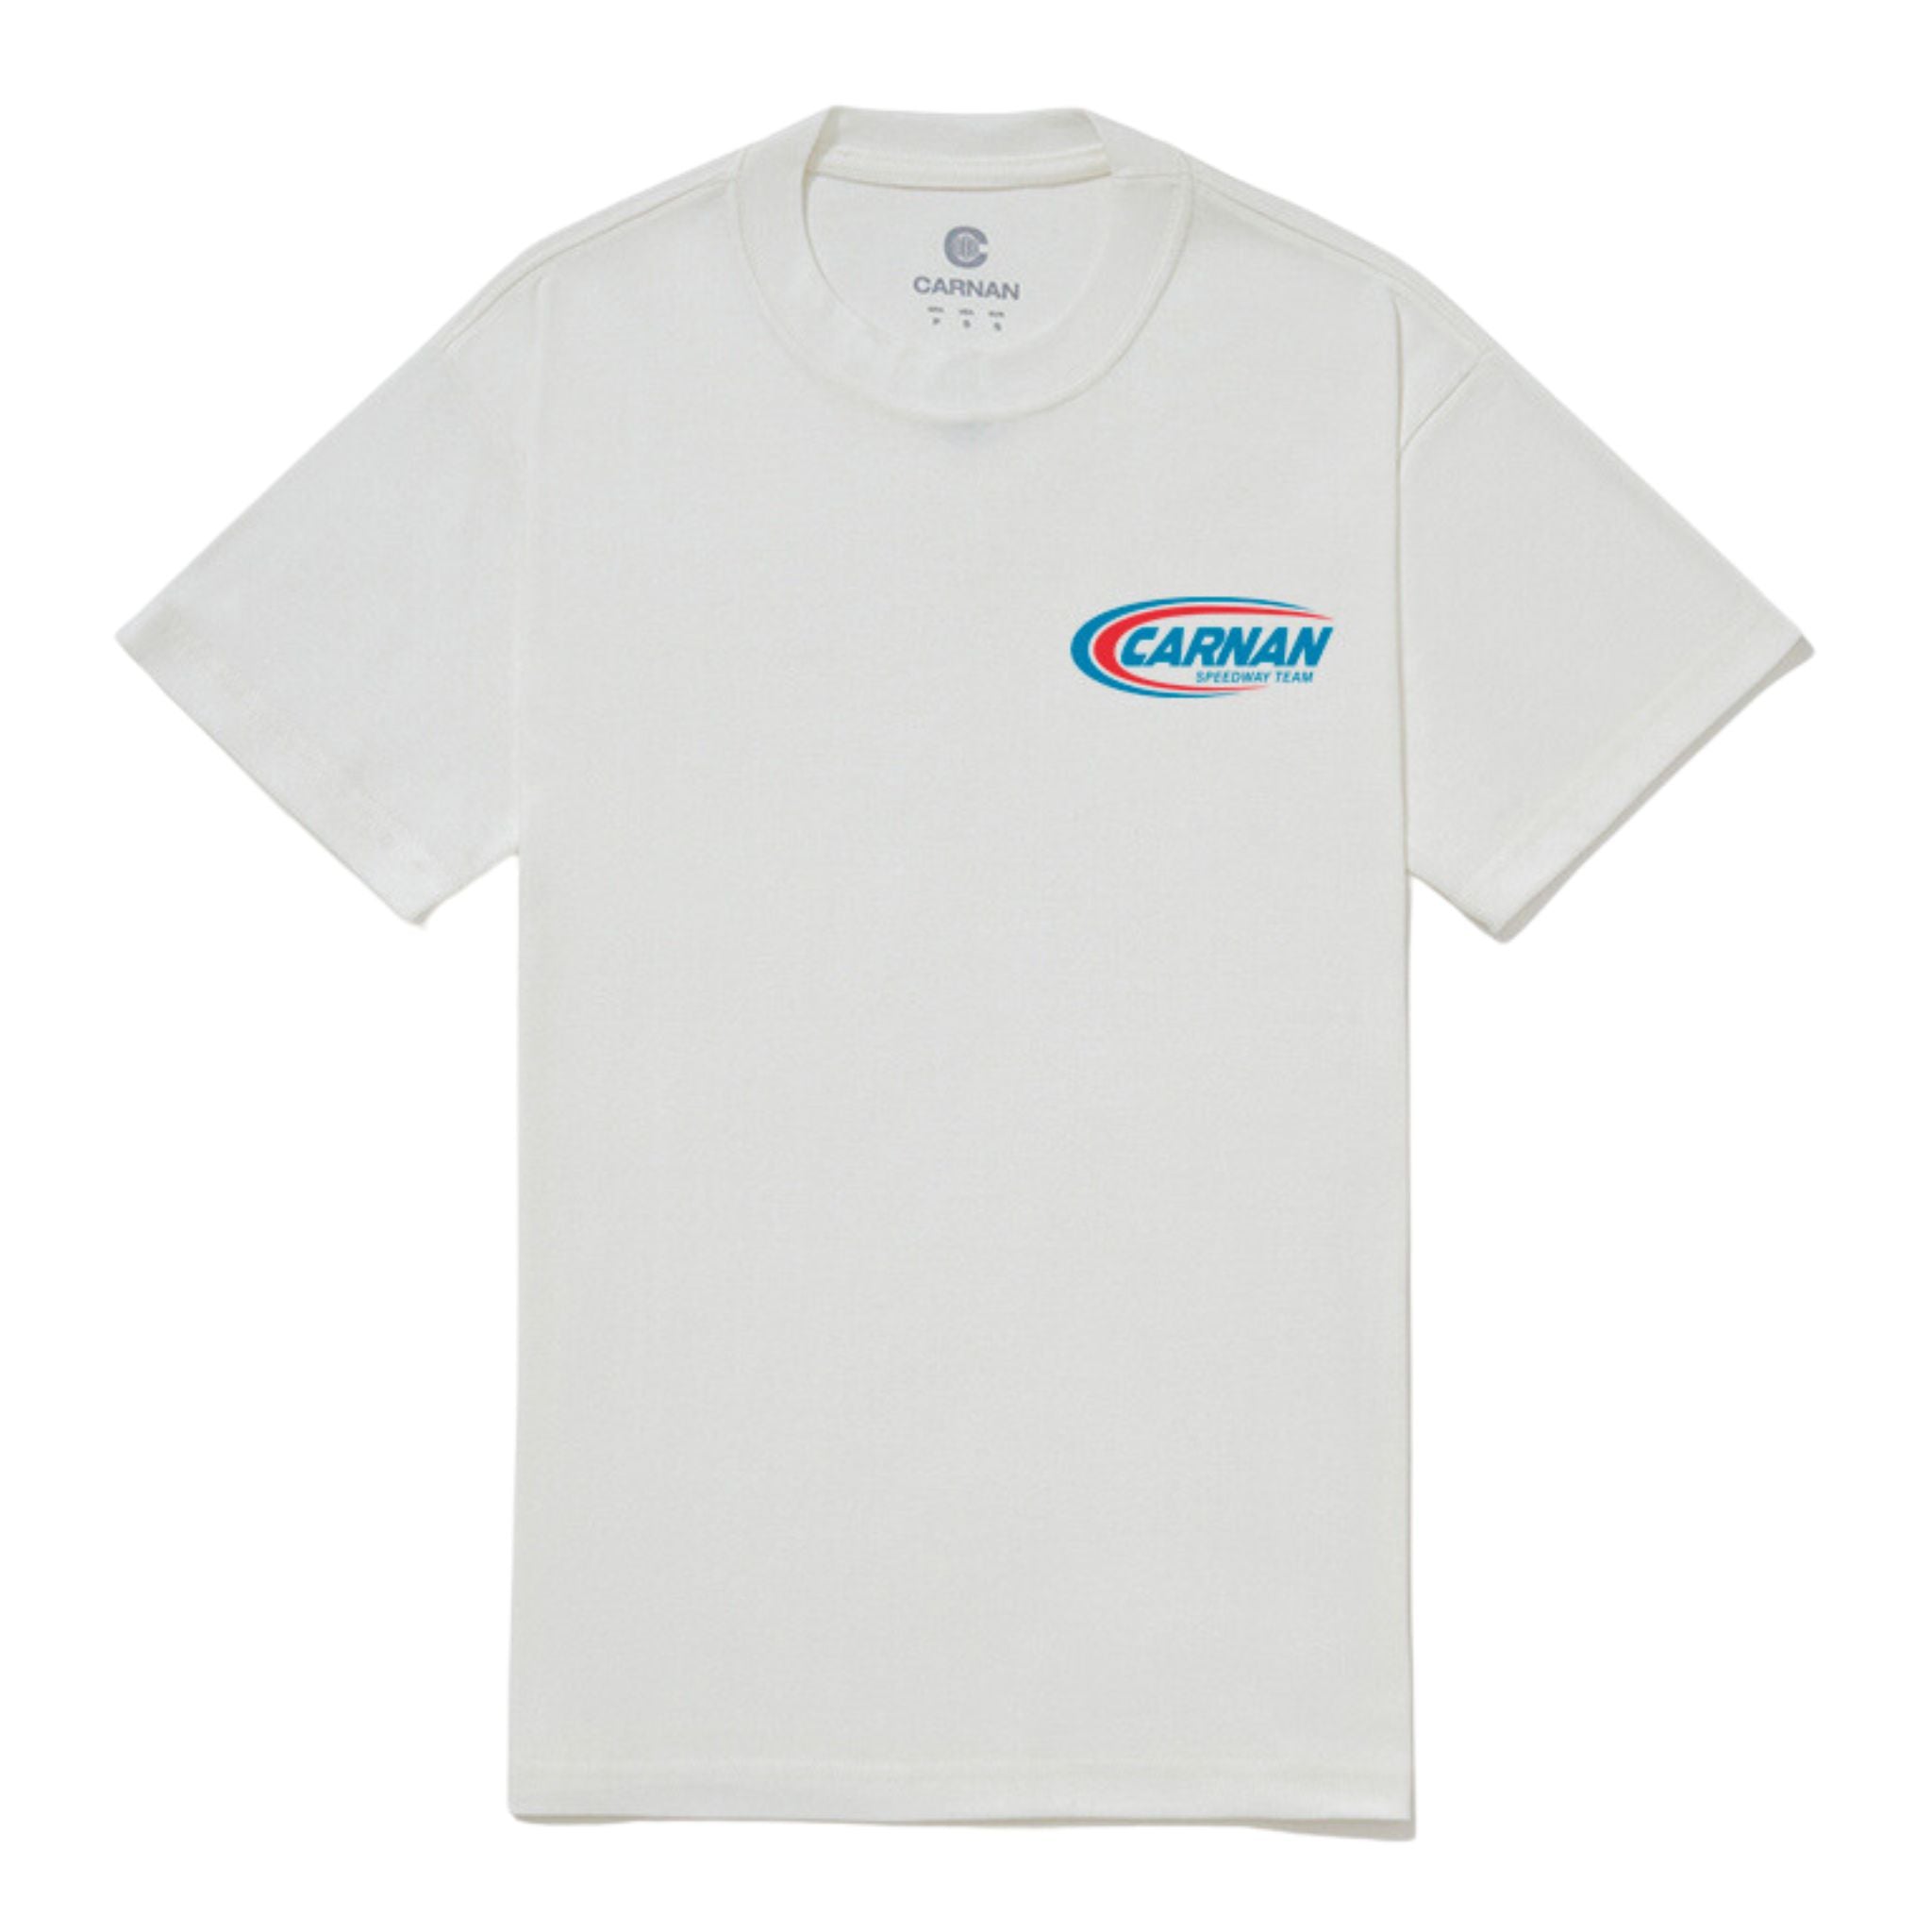 CARNAN - Heavy T-shirt Service Department "Off" - THE GAME